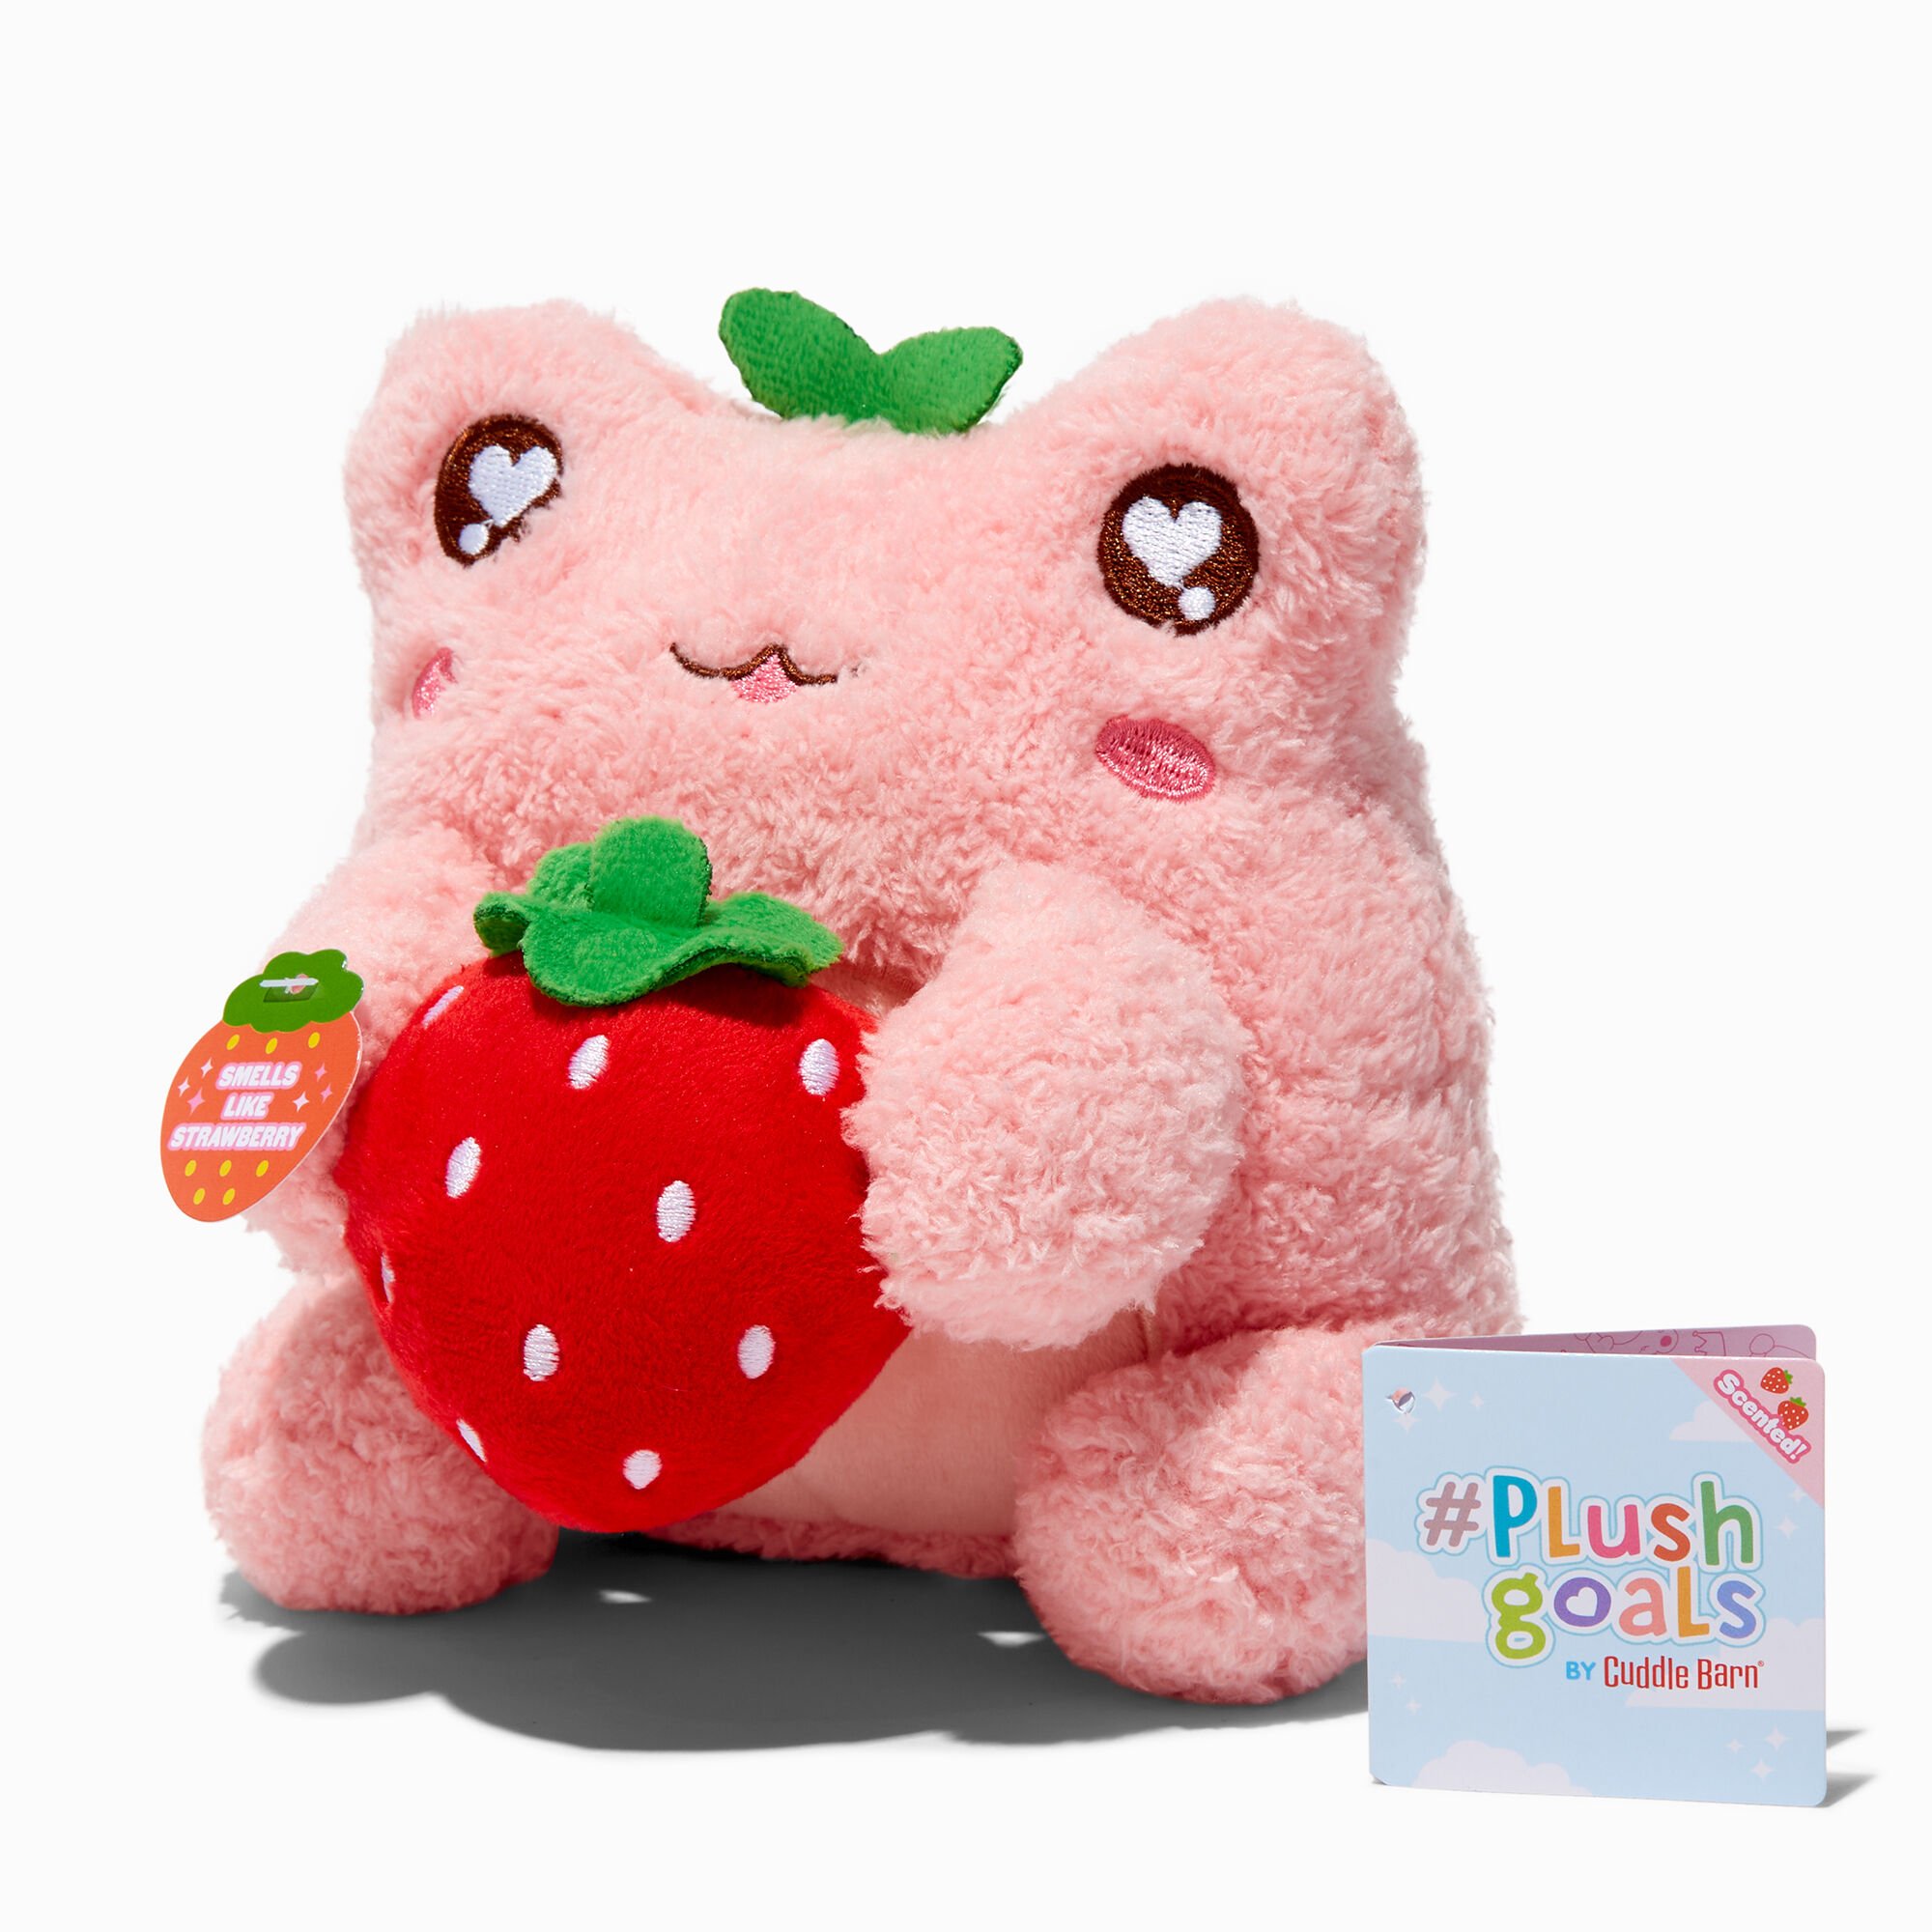 View Claires plush Goals By Cuddle Barn 8 Strawberry Wawa Plush Toy information